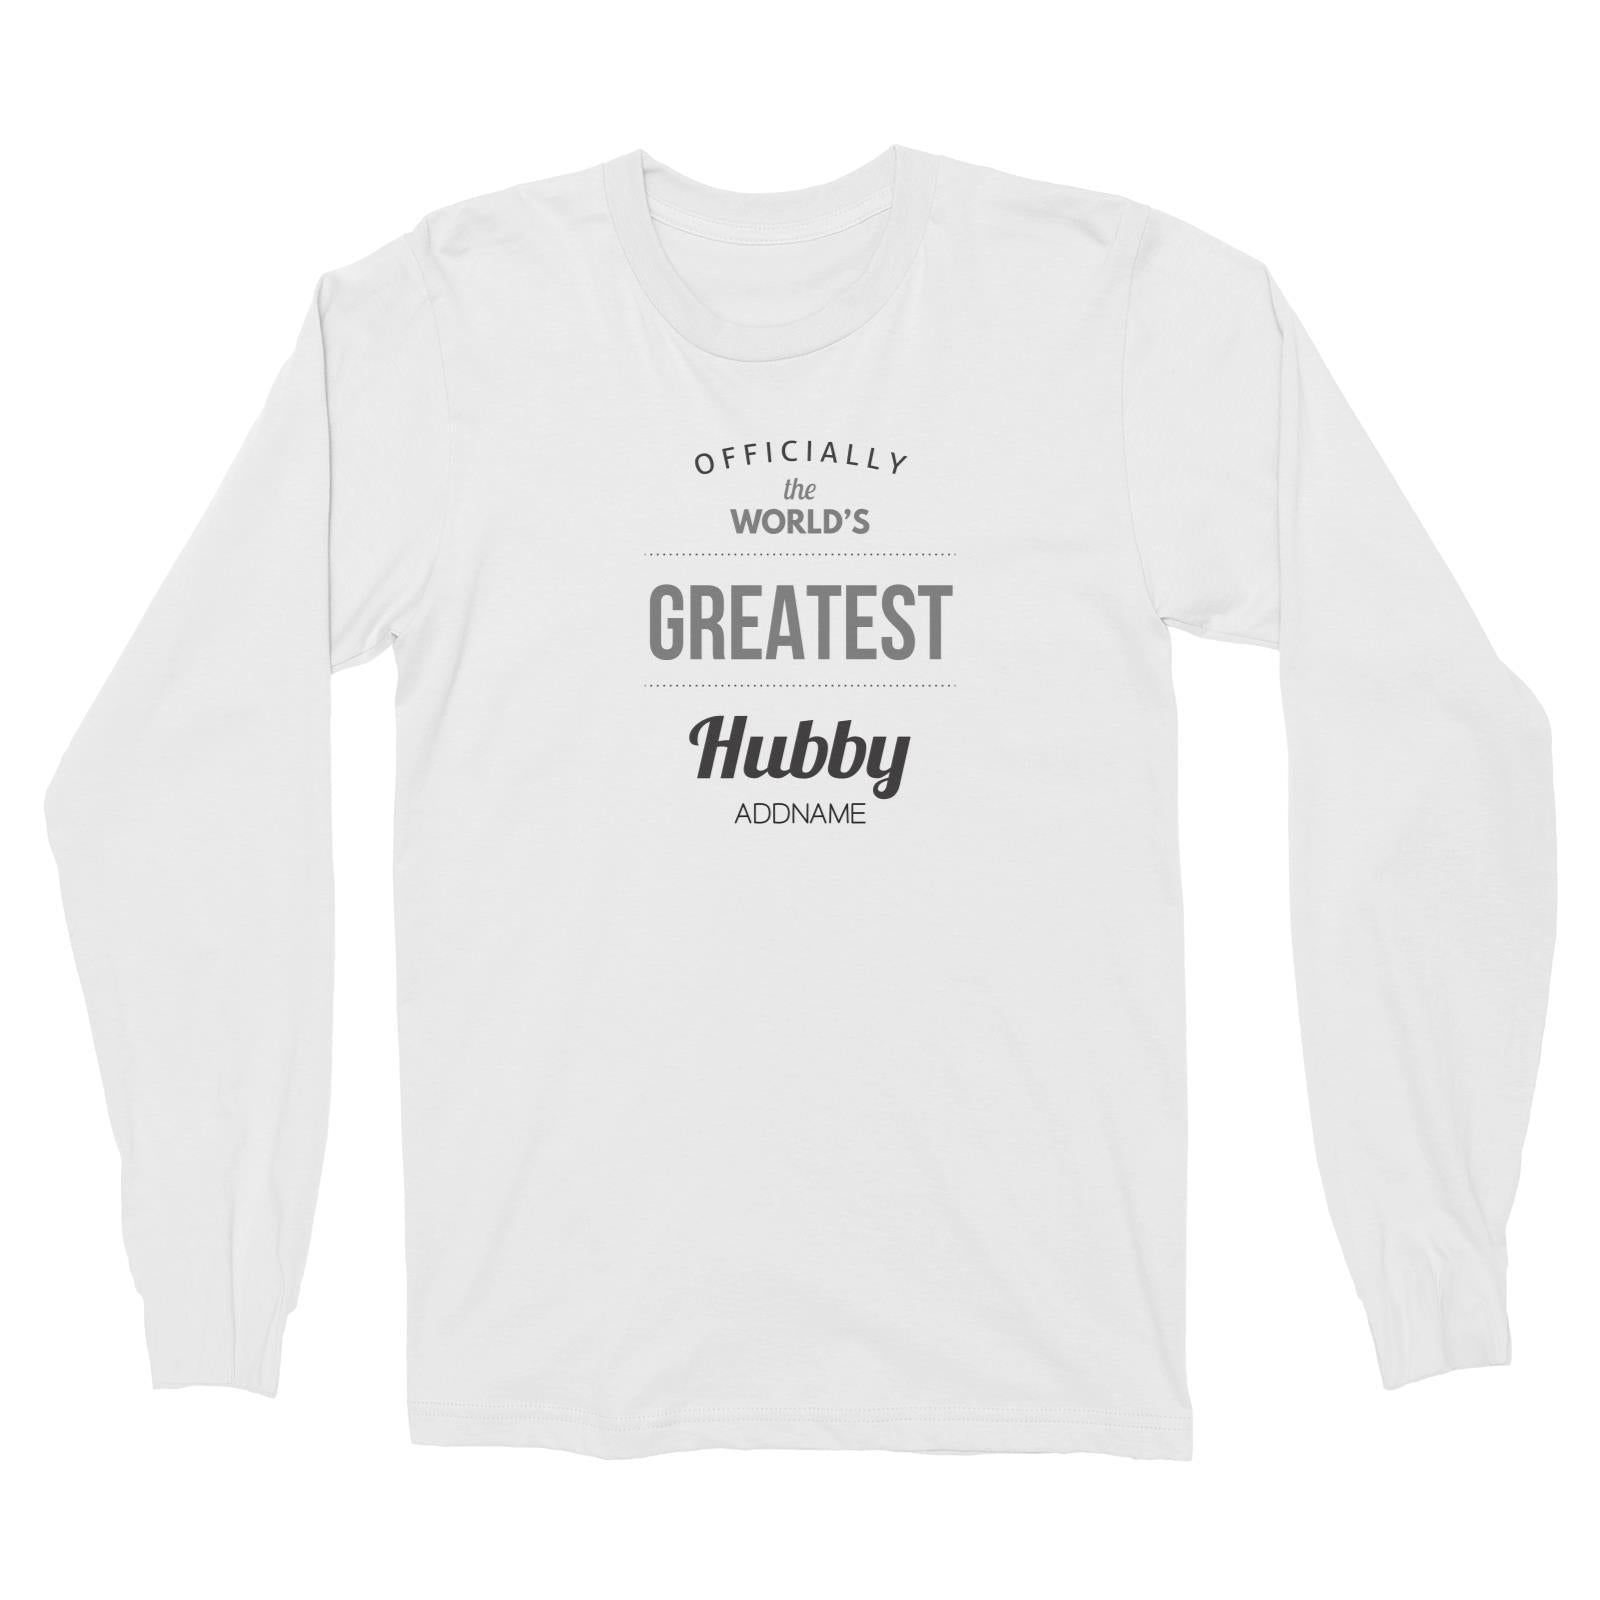 Husband and Wife Officially The World's Geatest Hubby Addname Long Sleeve Unisex T-Shirt